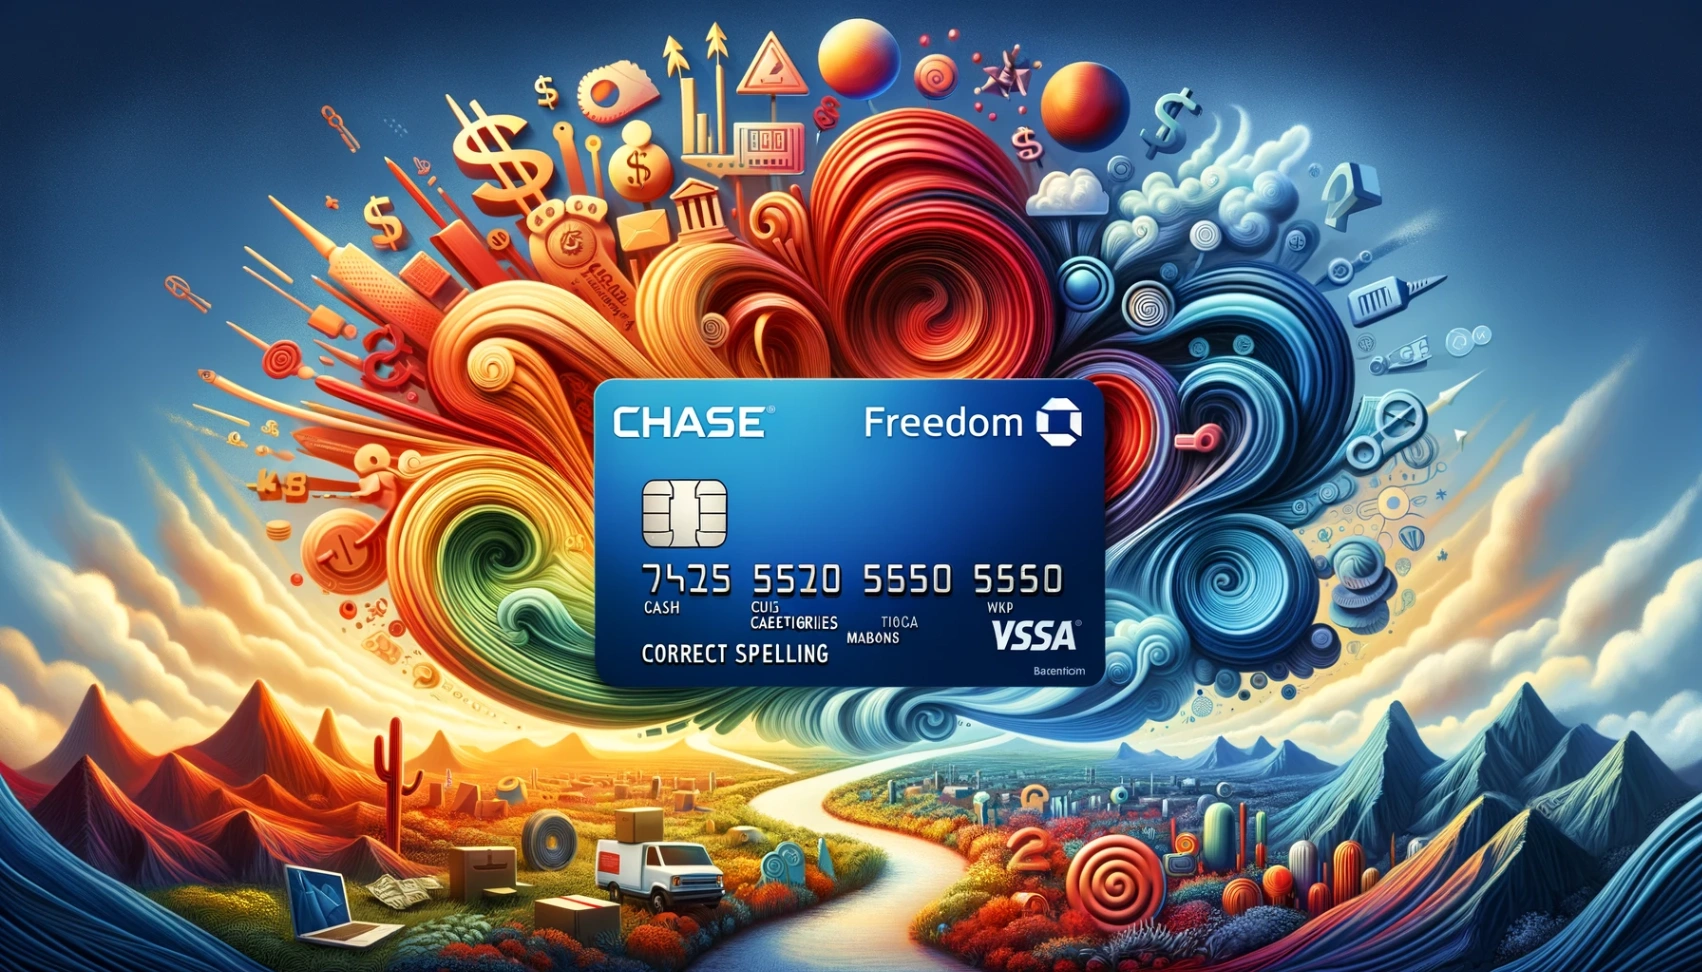 Chase Freedom Credit Card: Step-by-Step Application Instructions